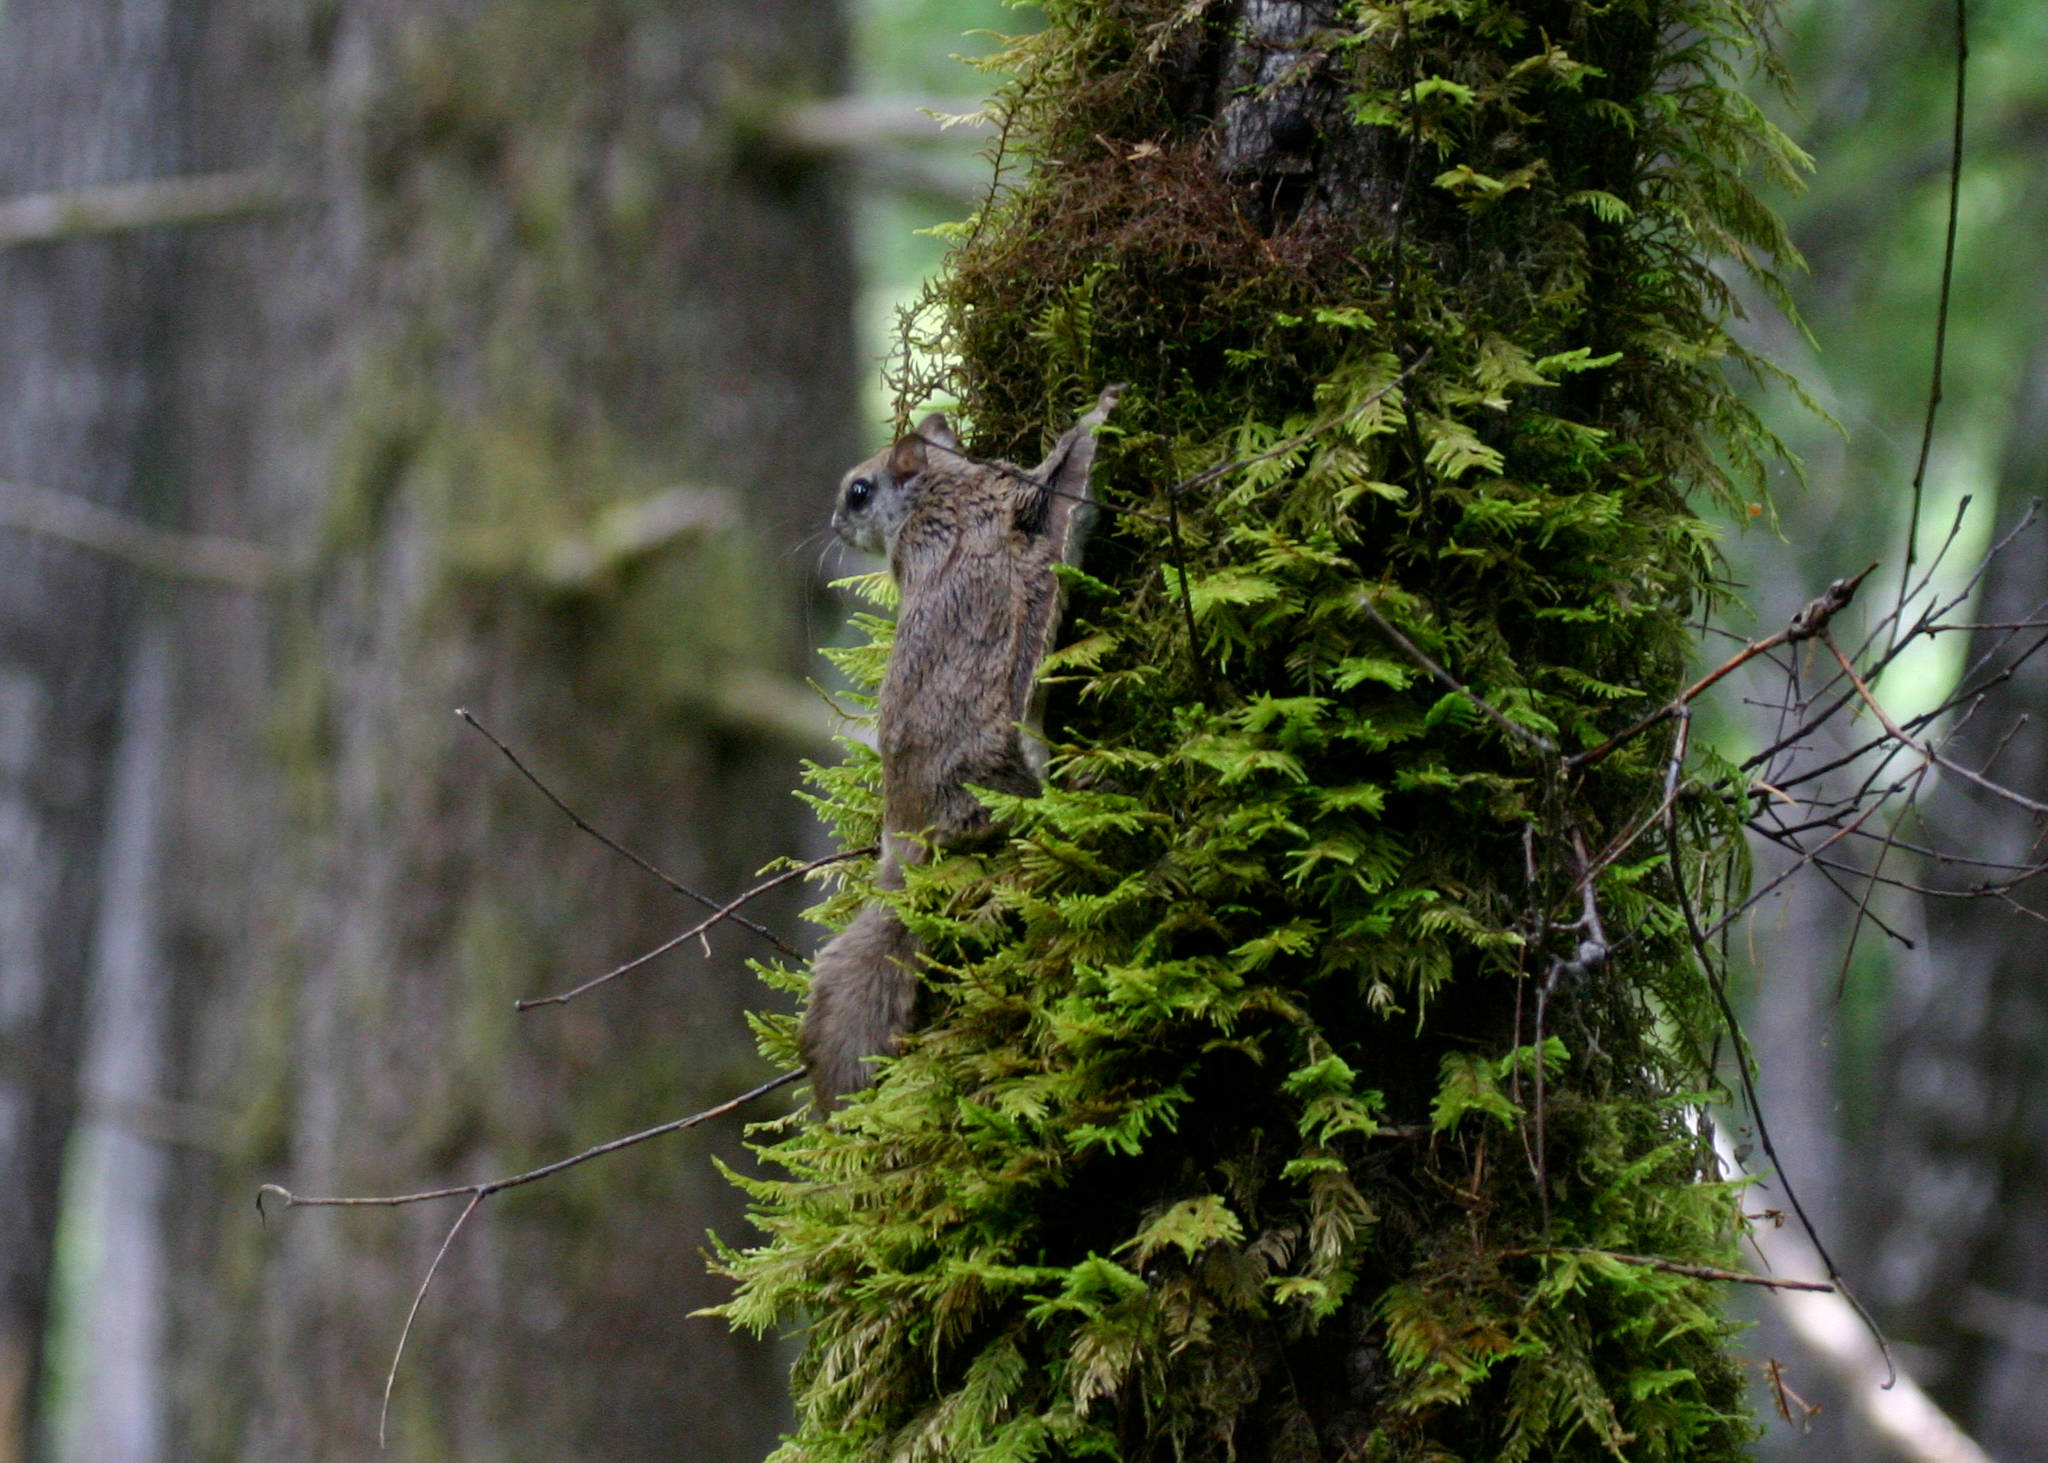 Humboldt’s flying squirrel, pictured, was previously considered a northern flying squirrel, but research by a Juneau scientist published in a May 30 paper has helped establish it as a separate species. This photo provided by paper co-author Nick Kerhoulas was taken in Mendocino County, California. Kerhoulas is a Ph.D. candidate at the University of Alaska Fairbanks. (Courtesy Photo | Nick Kerhoulas)